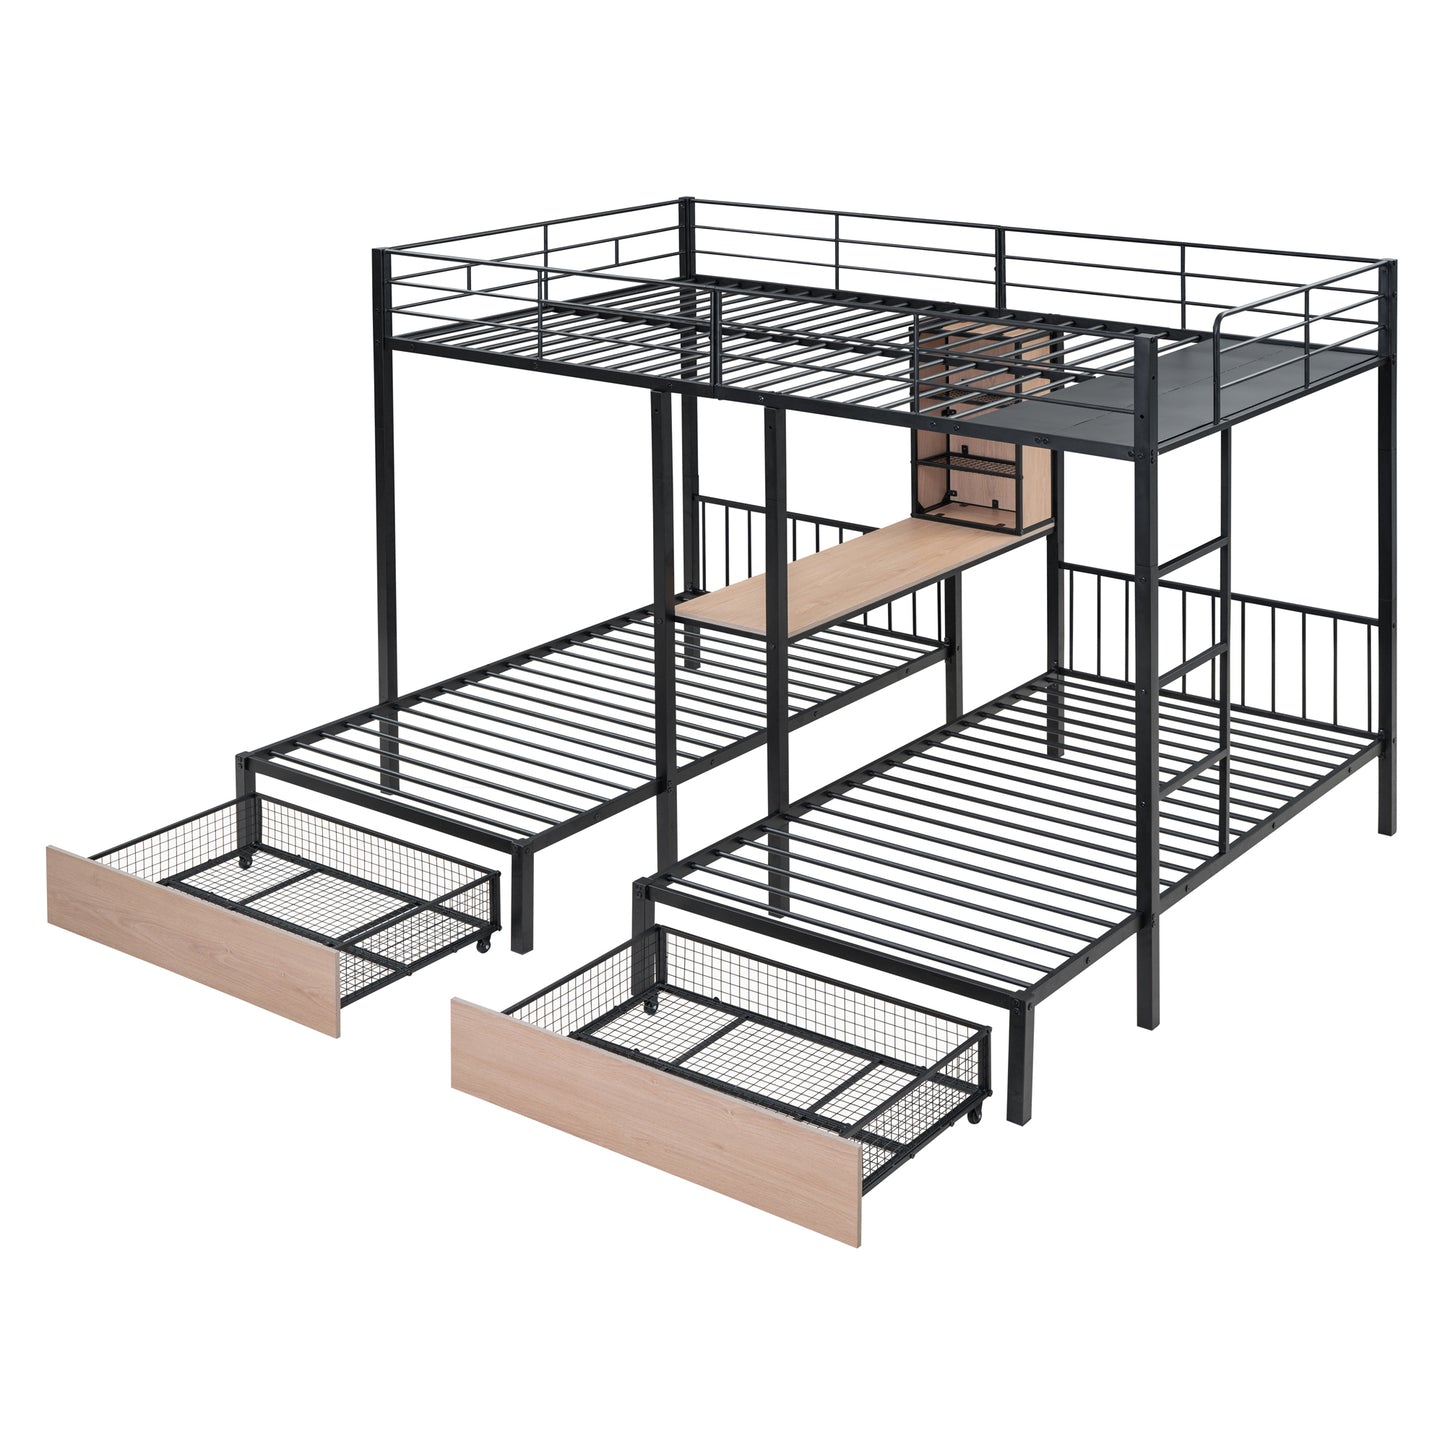 Full Over Twin & Twin Triple Bunk Bed with Drawers, Multi-functional Metal Frame Bed with desks and shelves in the middle, Black